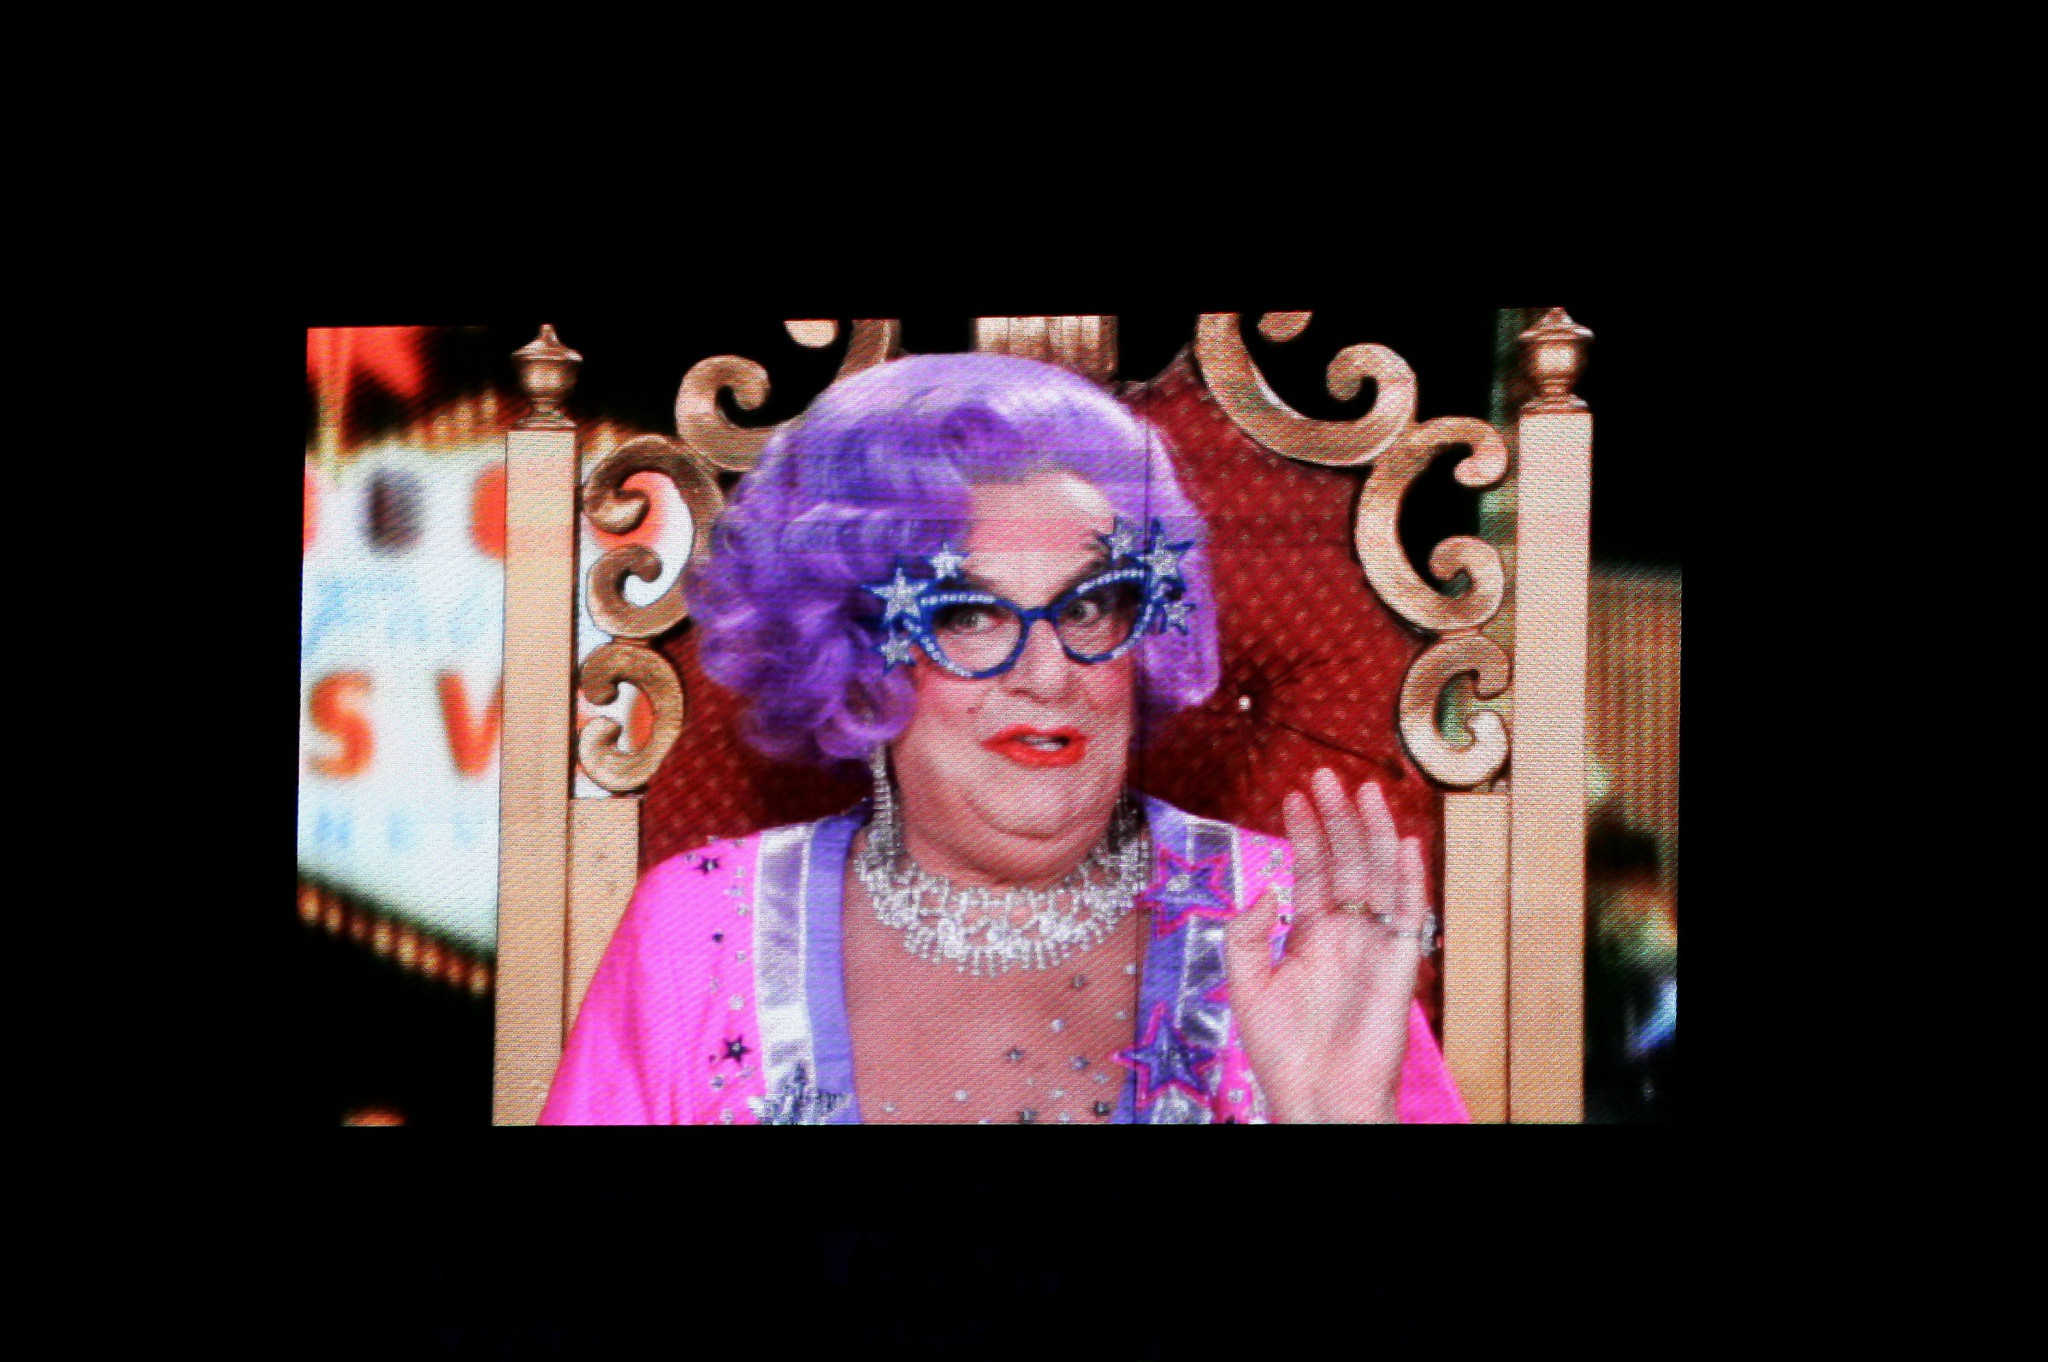 Dame Edna Everage was part of the Closing Ceremony at the Melbourne 2006 Commonwealth Games ©Getty Images